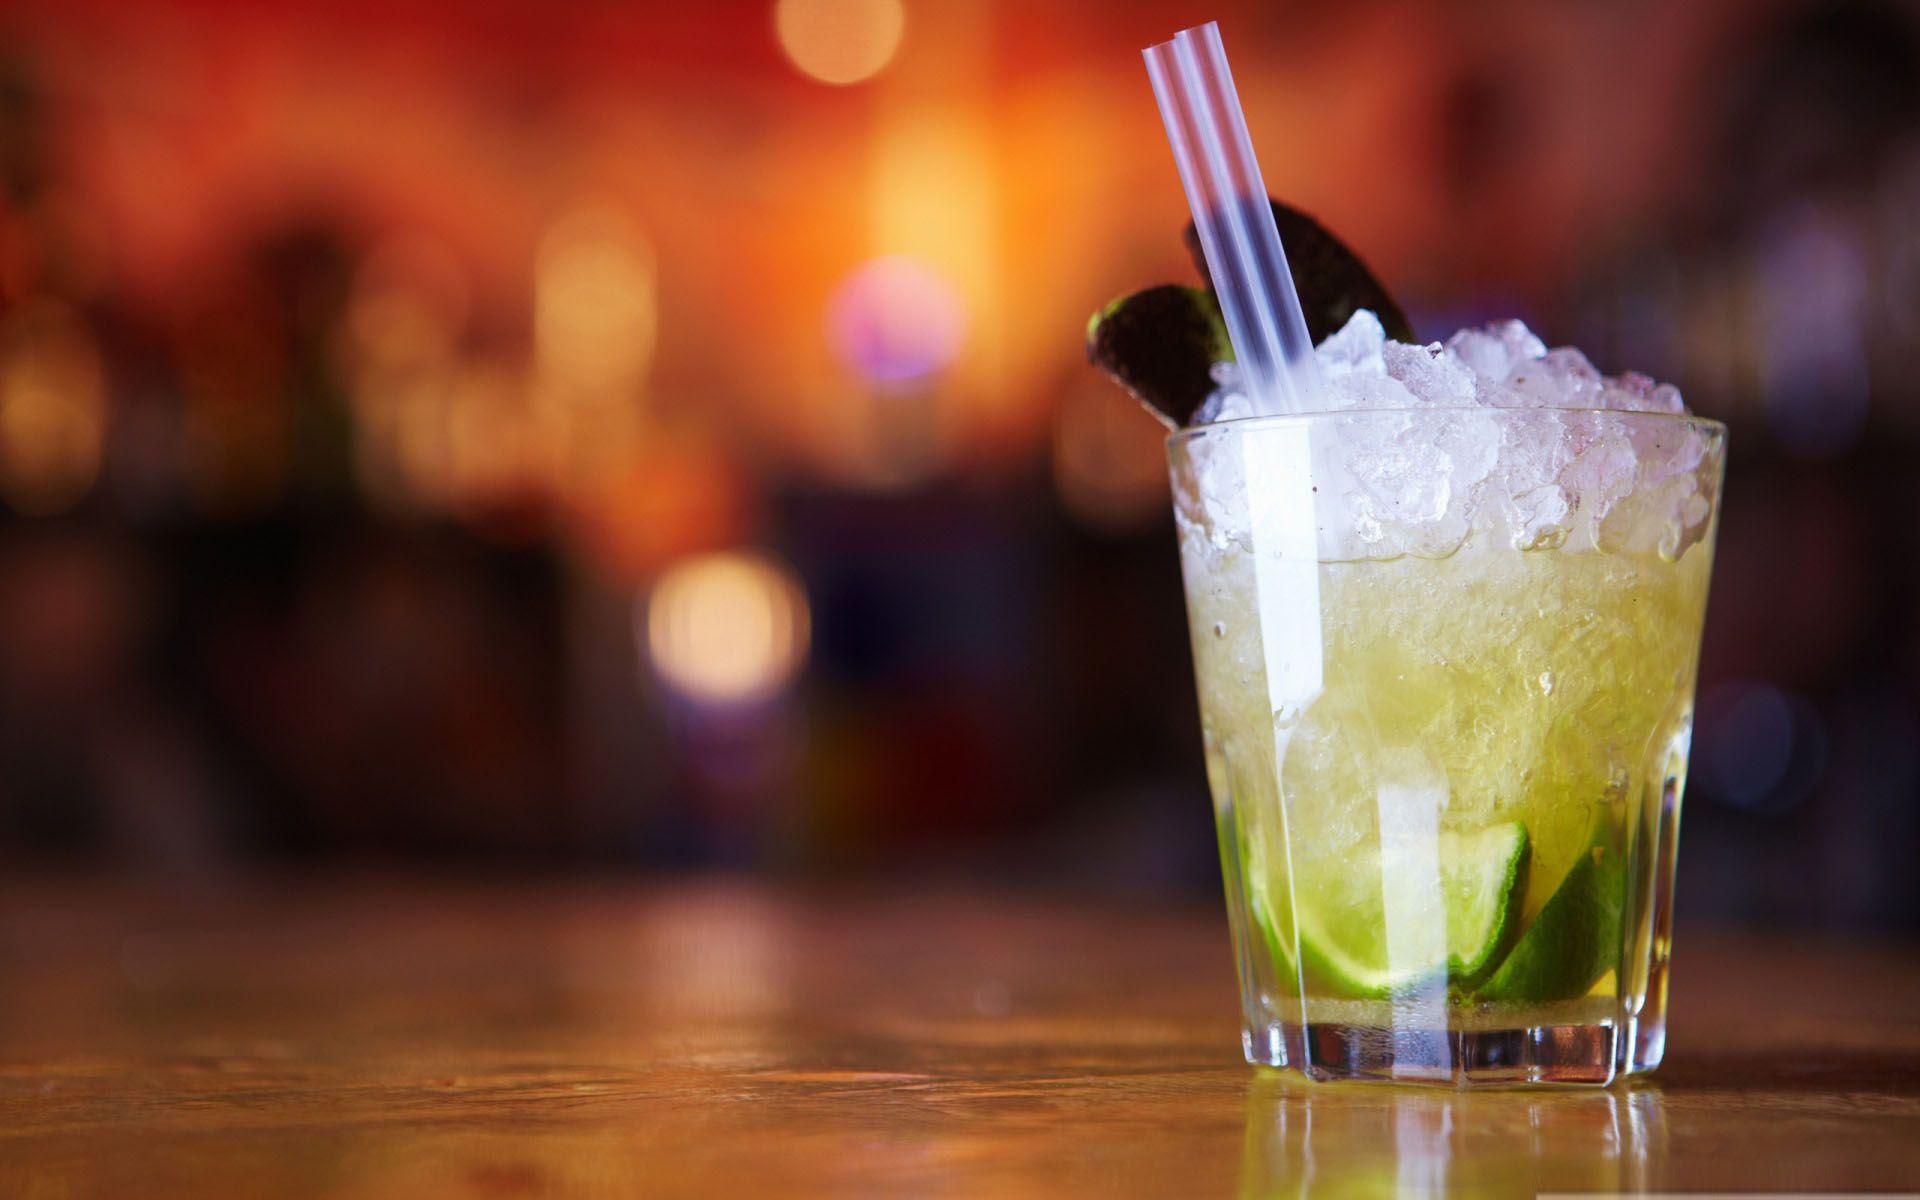 Widescreen Lime Cocktail Wallpaper. High Defenition Wallpaper